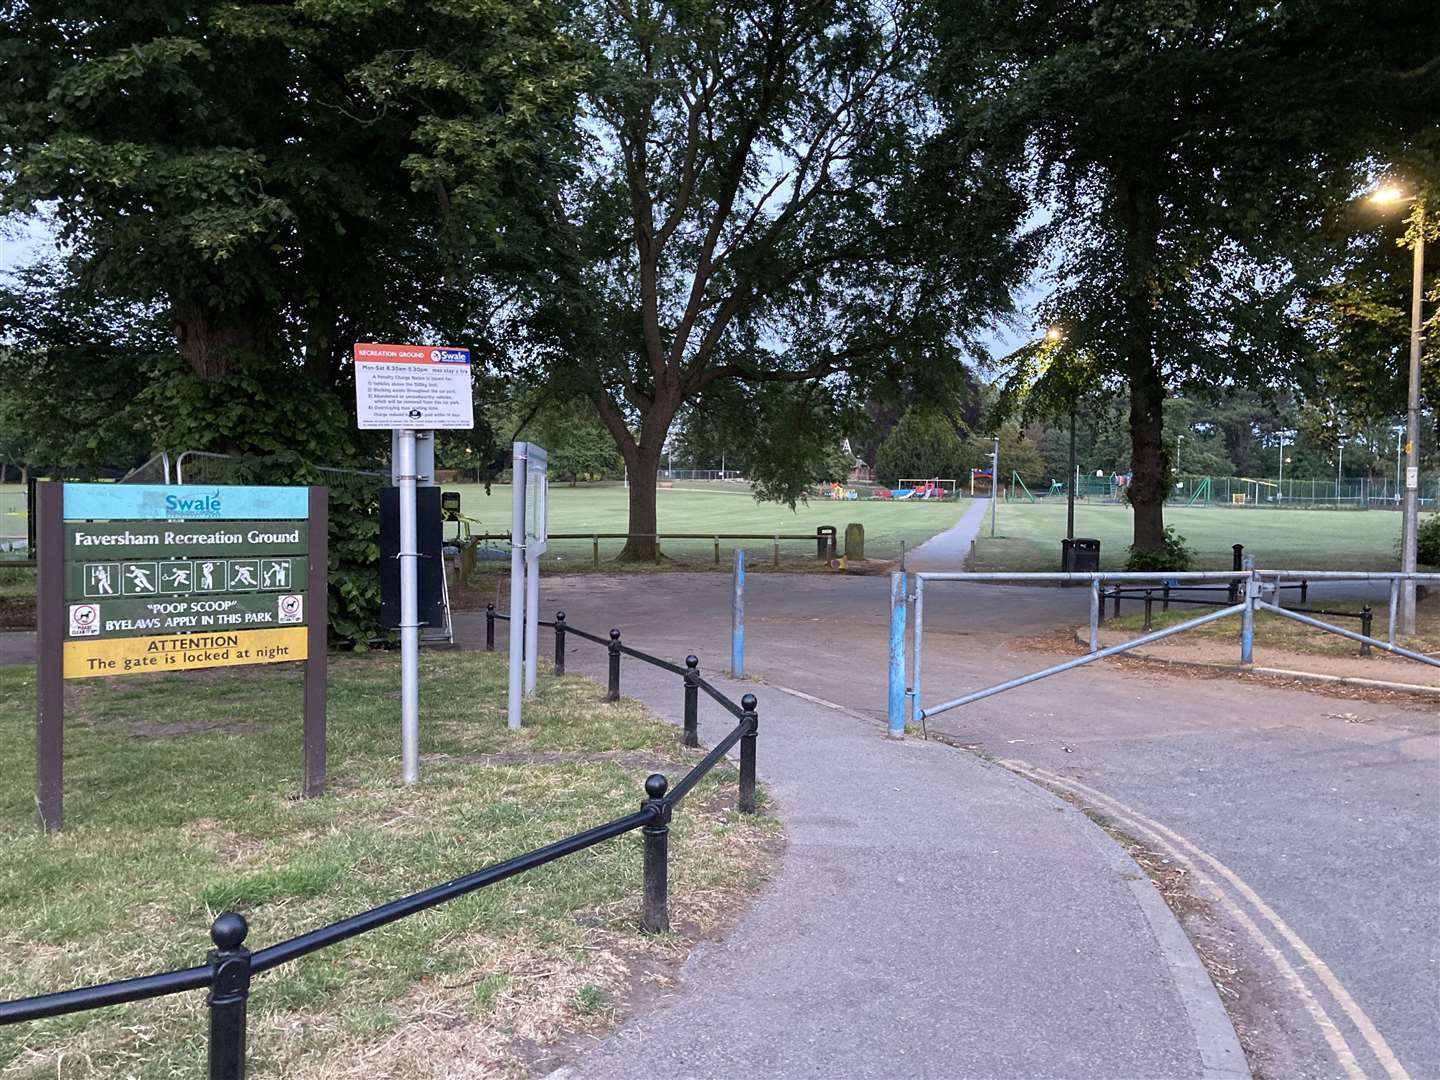 The recreation ground is becoming a hotbed for crime